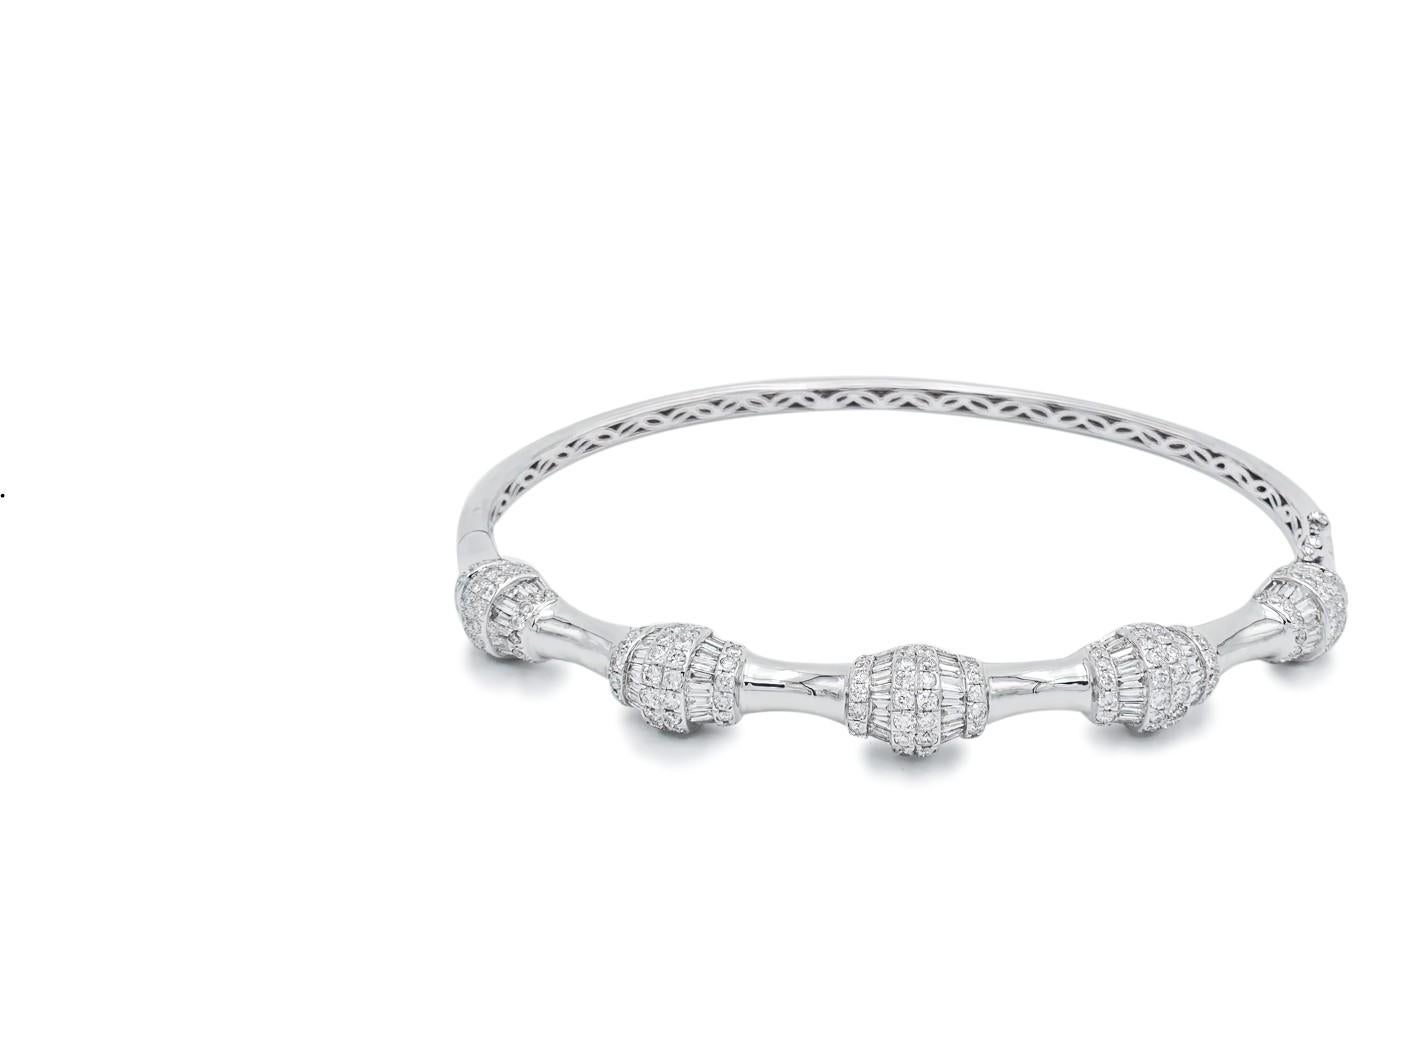 Total Bracelet Carat Weight: 3.09cts
Diamond Clarity: VS1
Diamond Color: F
Gold Purity: 18k
Gold Color: White
Gold Weight: 16.26g
Diamond Type: Natural Diamonds, Conflict-Free

A quintessential bangle design reflecting your sense of style and